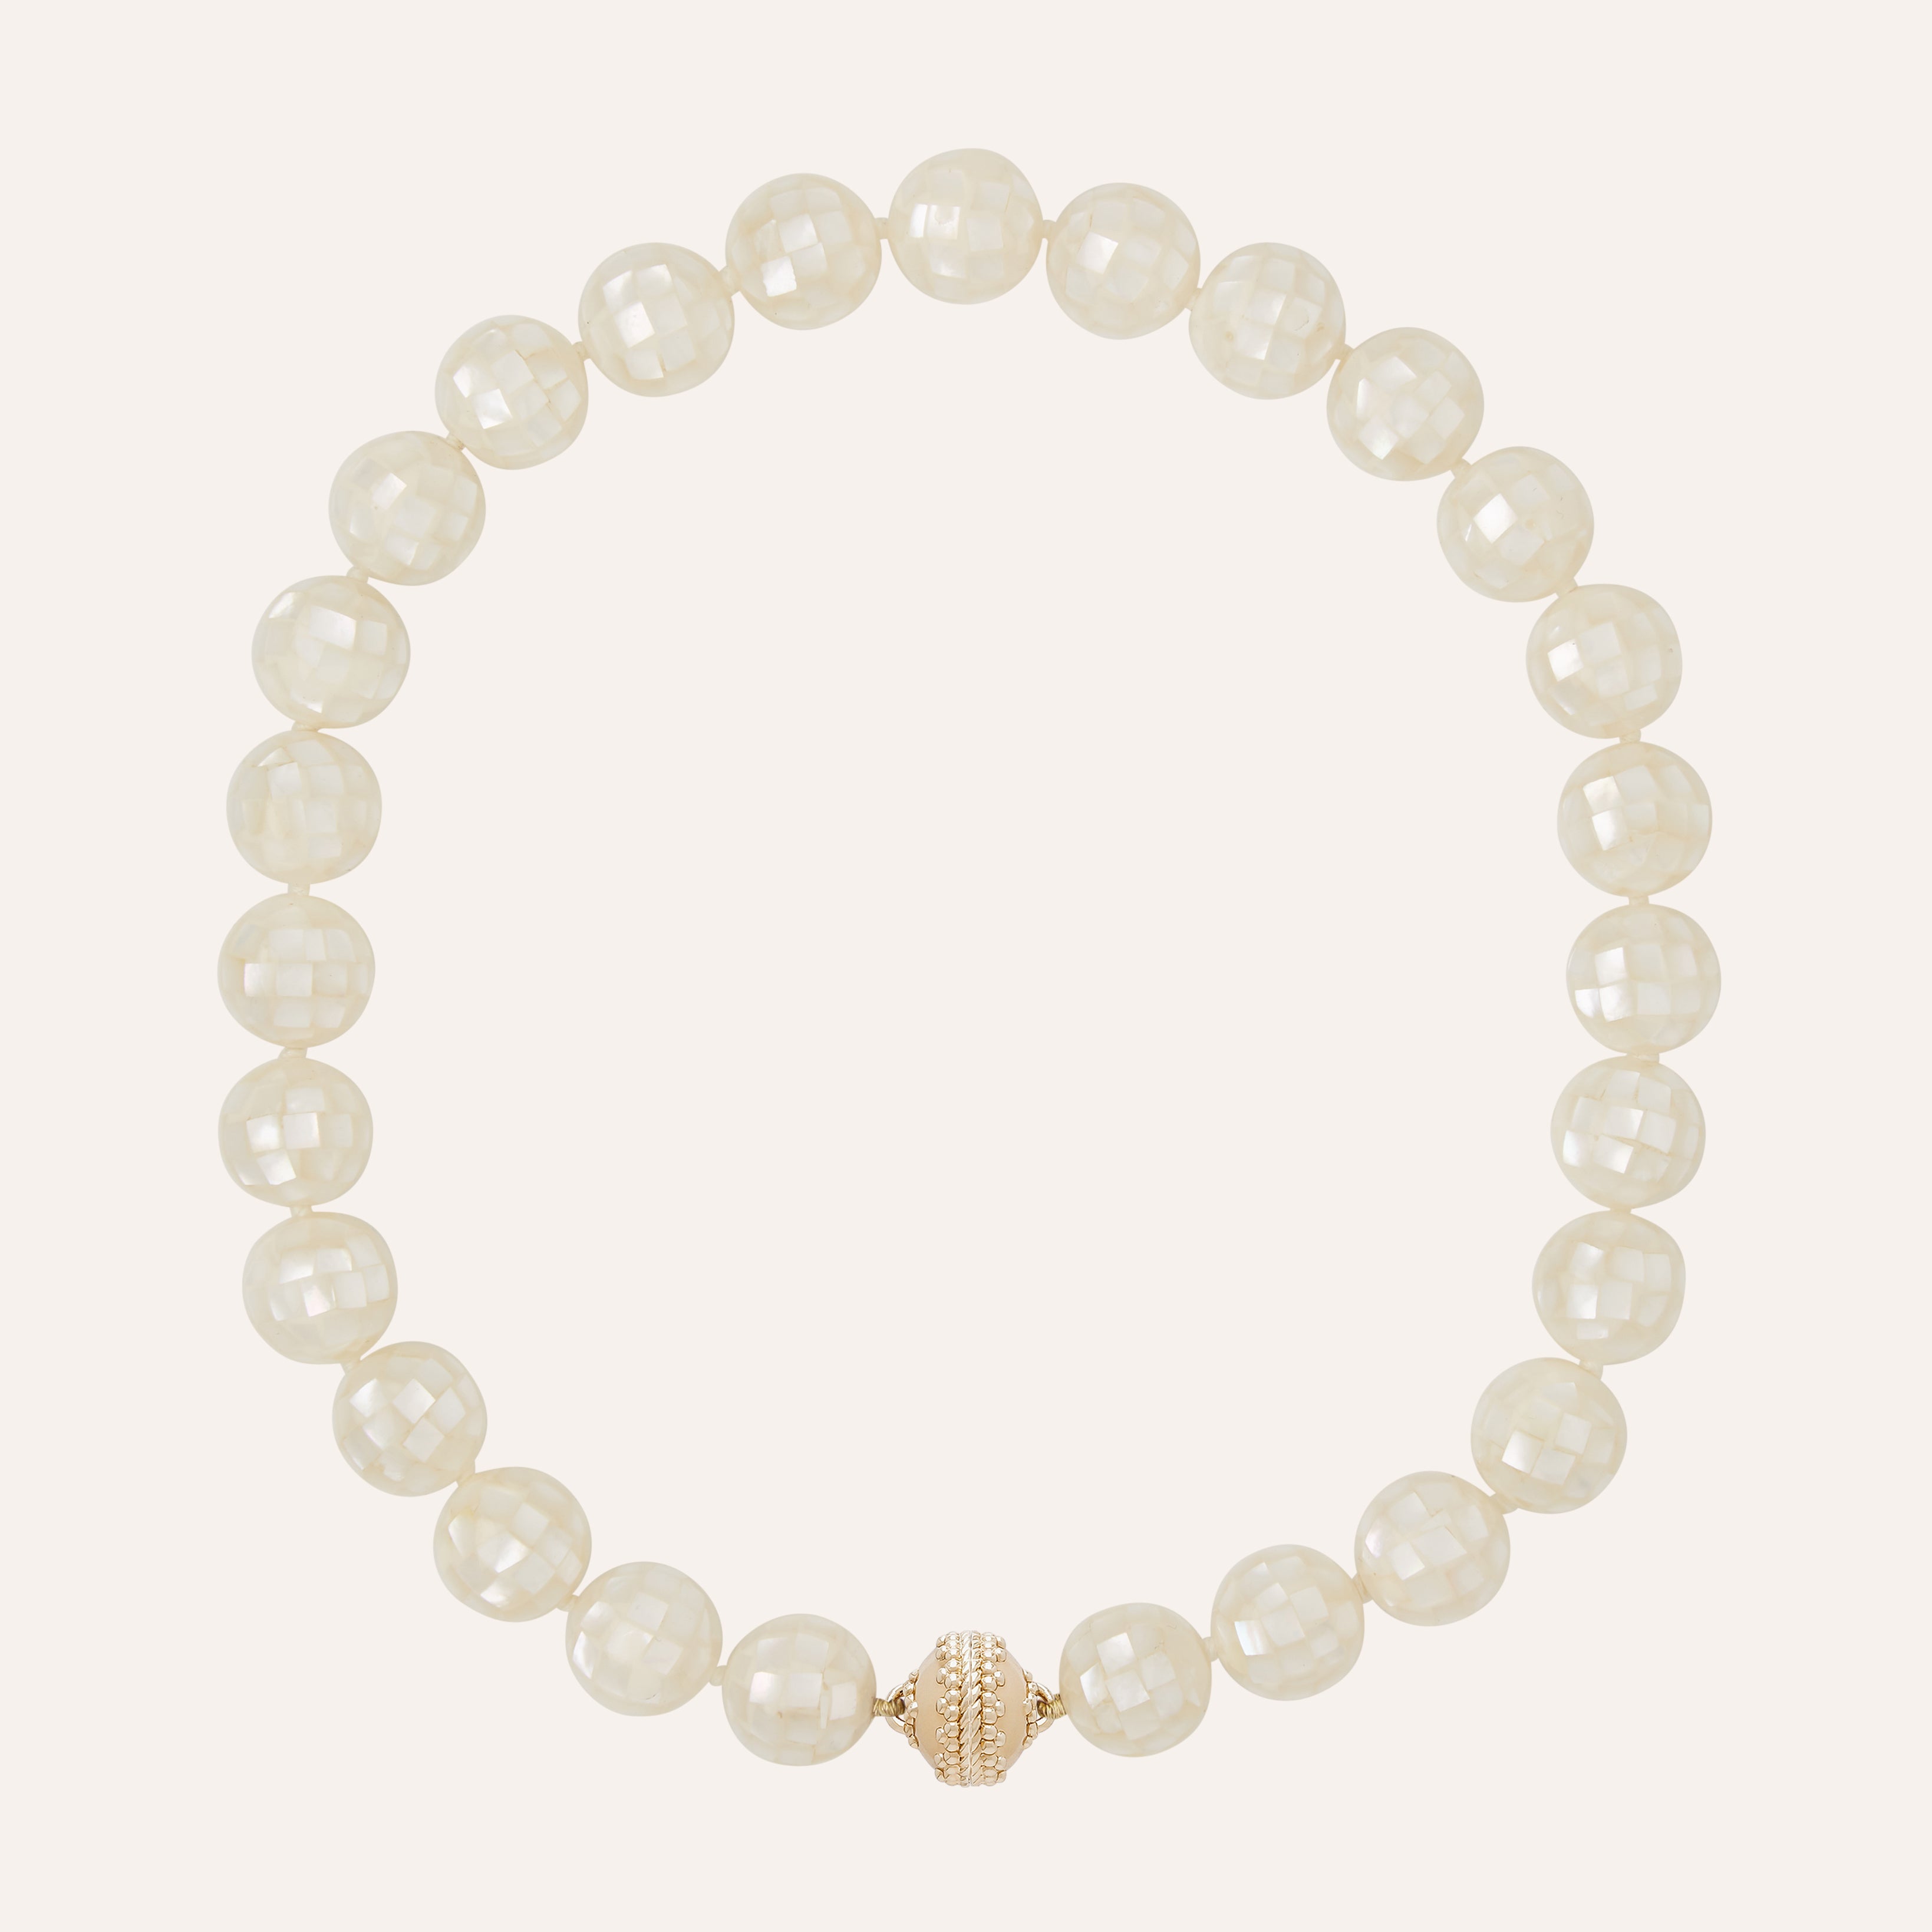 Victoire White Mosaic 14mm Necklace